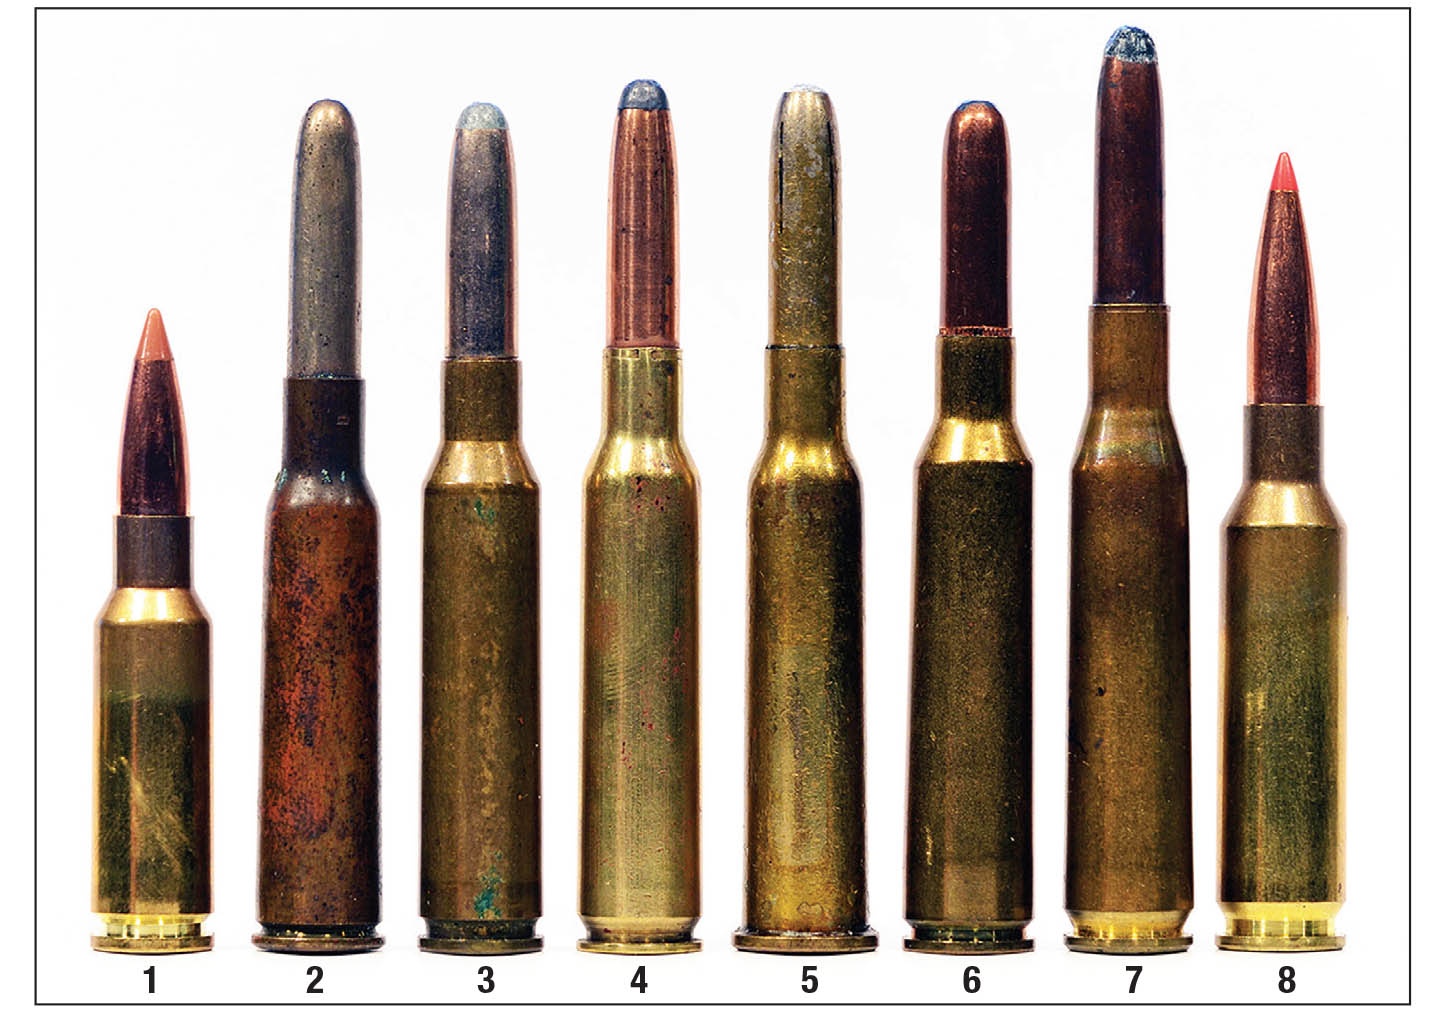 The 6.5mm lineup: (1) 6.5 Grendel, (2) 6.5 Arisaka, (3) 6.5 Carcano, (4) 6.5x54 Mannlicher-Schönauer, (5) 6.5 Dutch, (6) 6.5x55 Swedish, (7) 6.5x58 Mauser, (8) 6.5 Creedmoor. For 120 years, 6.5mm (.26) cartridges have blazed a vivid trail in both military and sporting use.